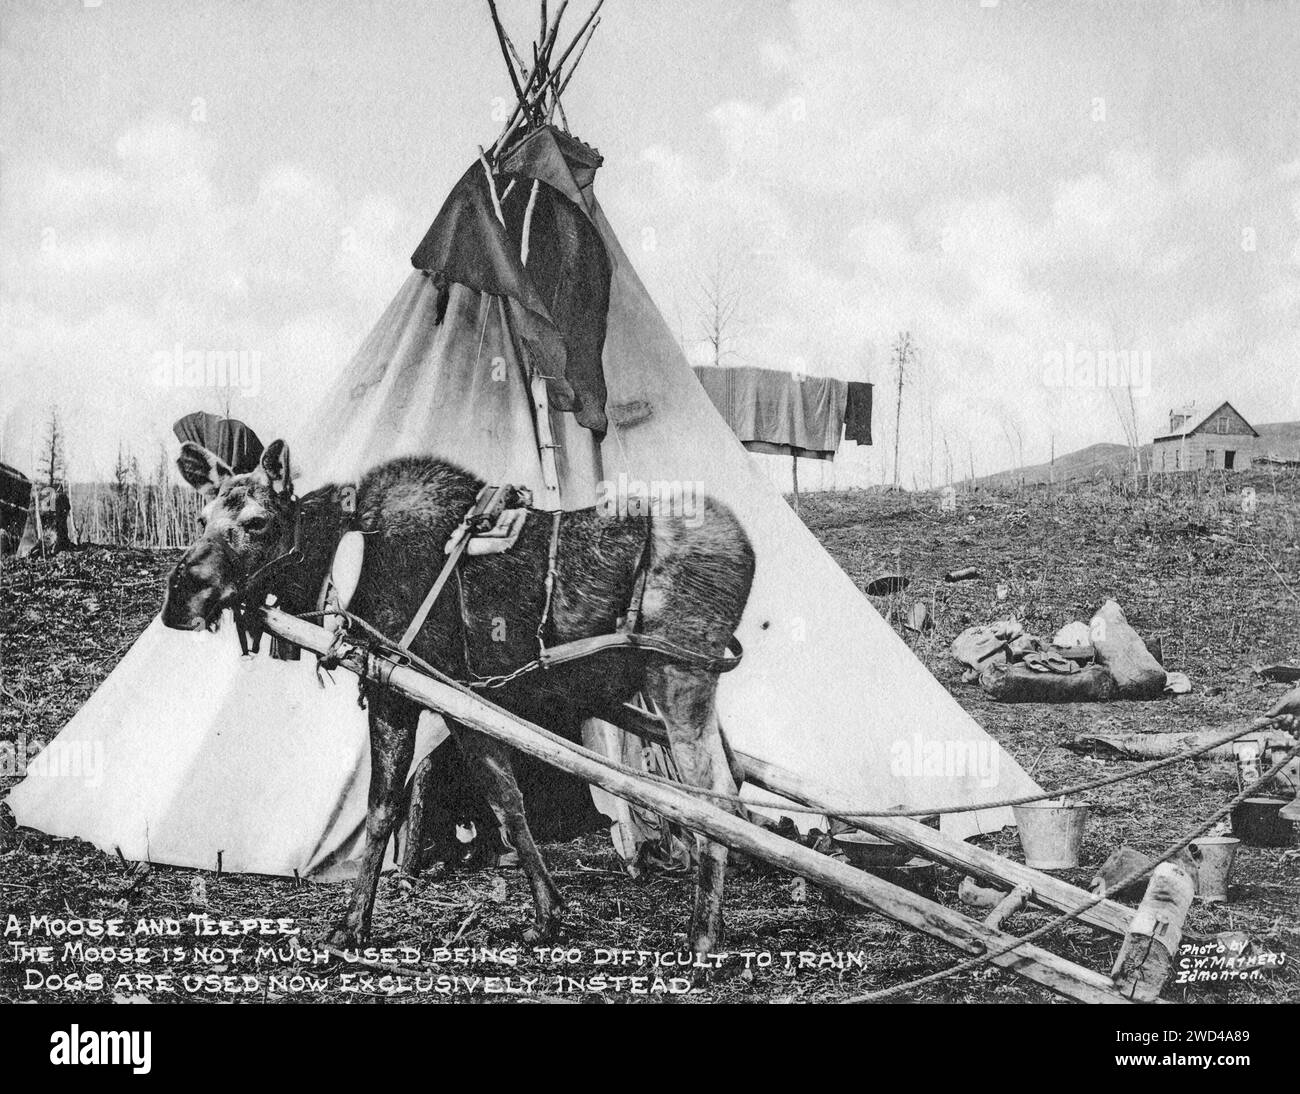 A 1901 photograph of an indigenous First Nations tipi with a moose harnessed to an A-frame travois (travoise, trevoy or travoy) in front, taken by C W Mathers on an expedition to the far north of Canada and published in his book ‘The Far North’. Mathers captioned this photograph: A moose and teepee. The moose is not much used being too difficult to train, dogs are used almost now exclusively instead. Stock Photo